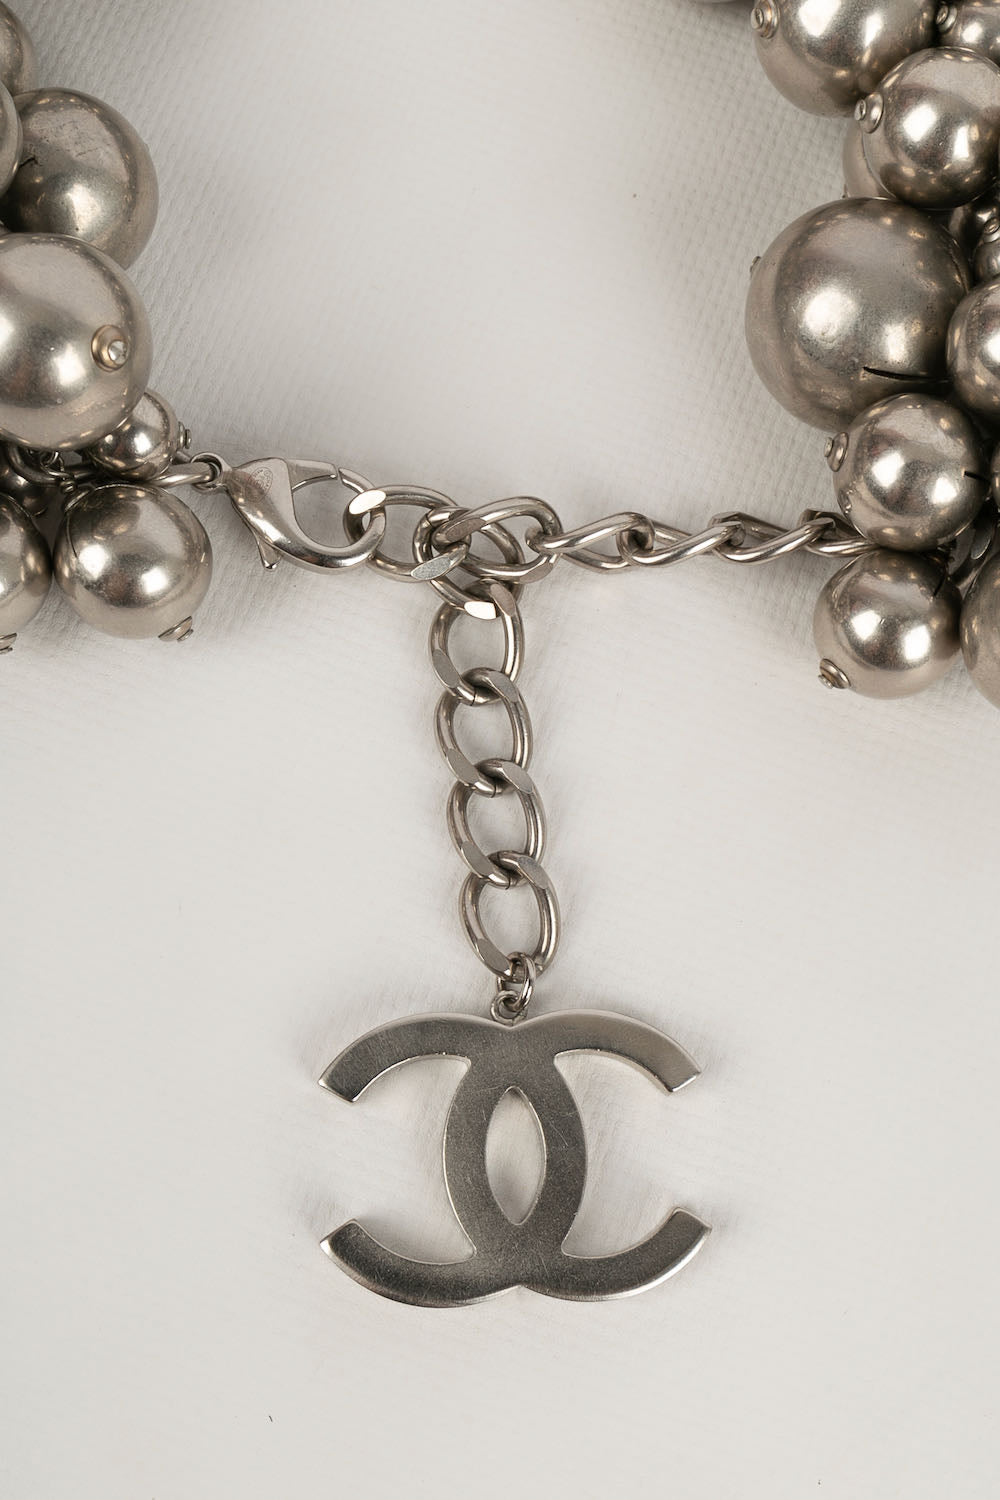 Chanel Summer 2013 necklace